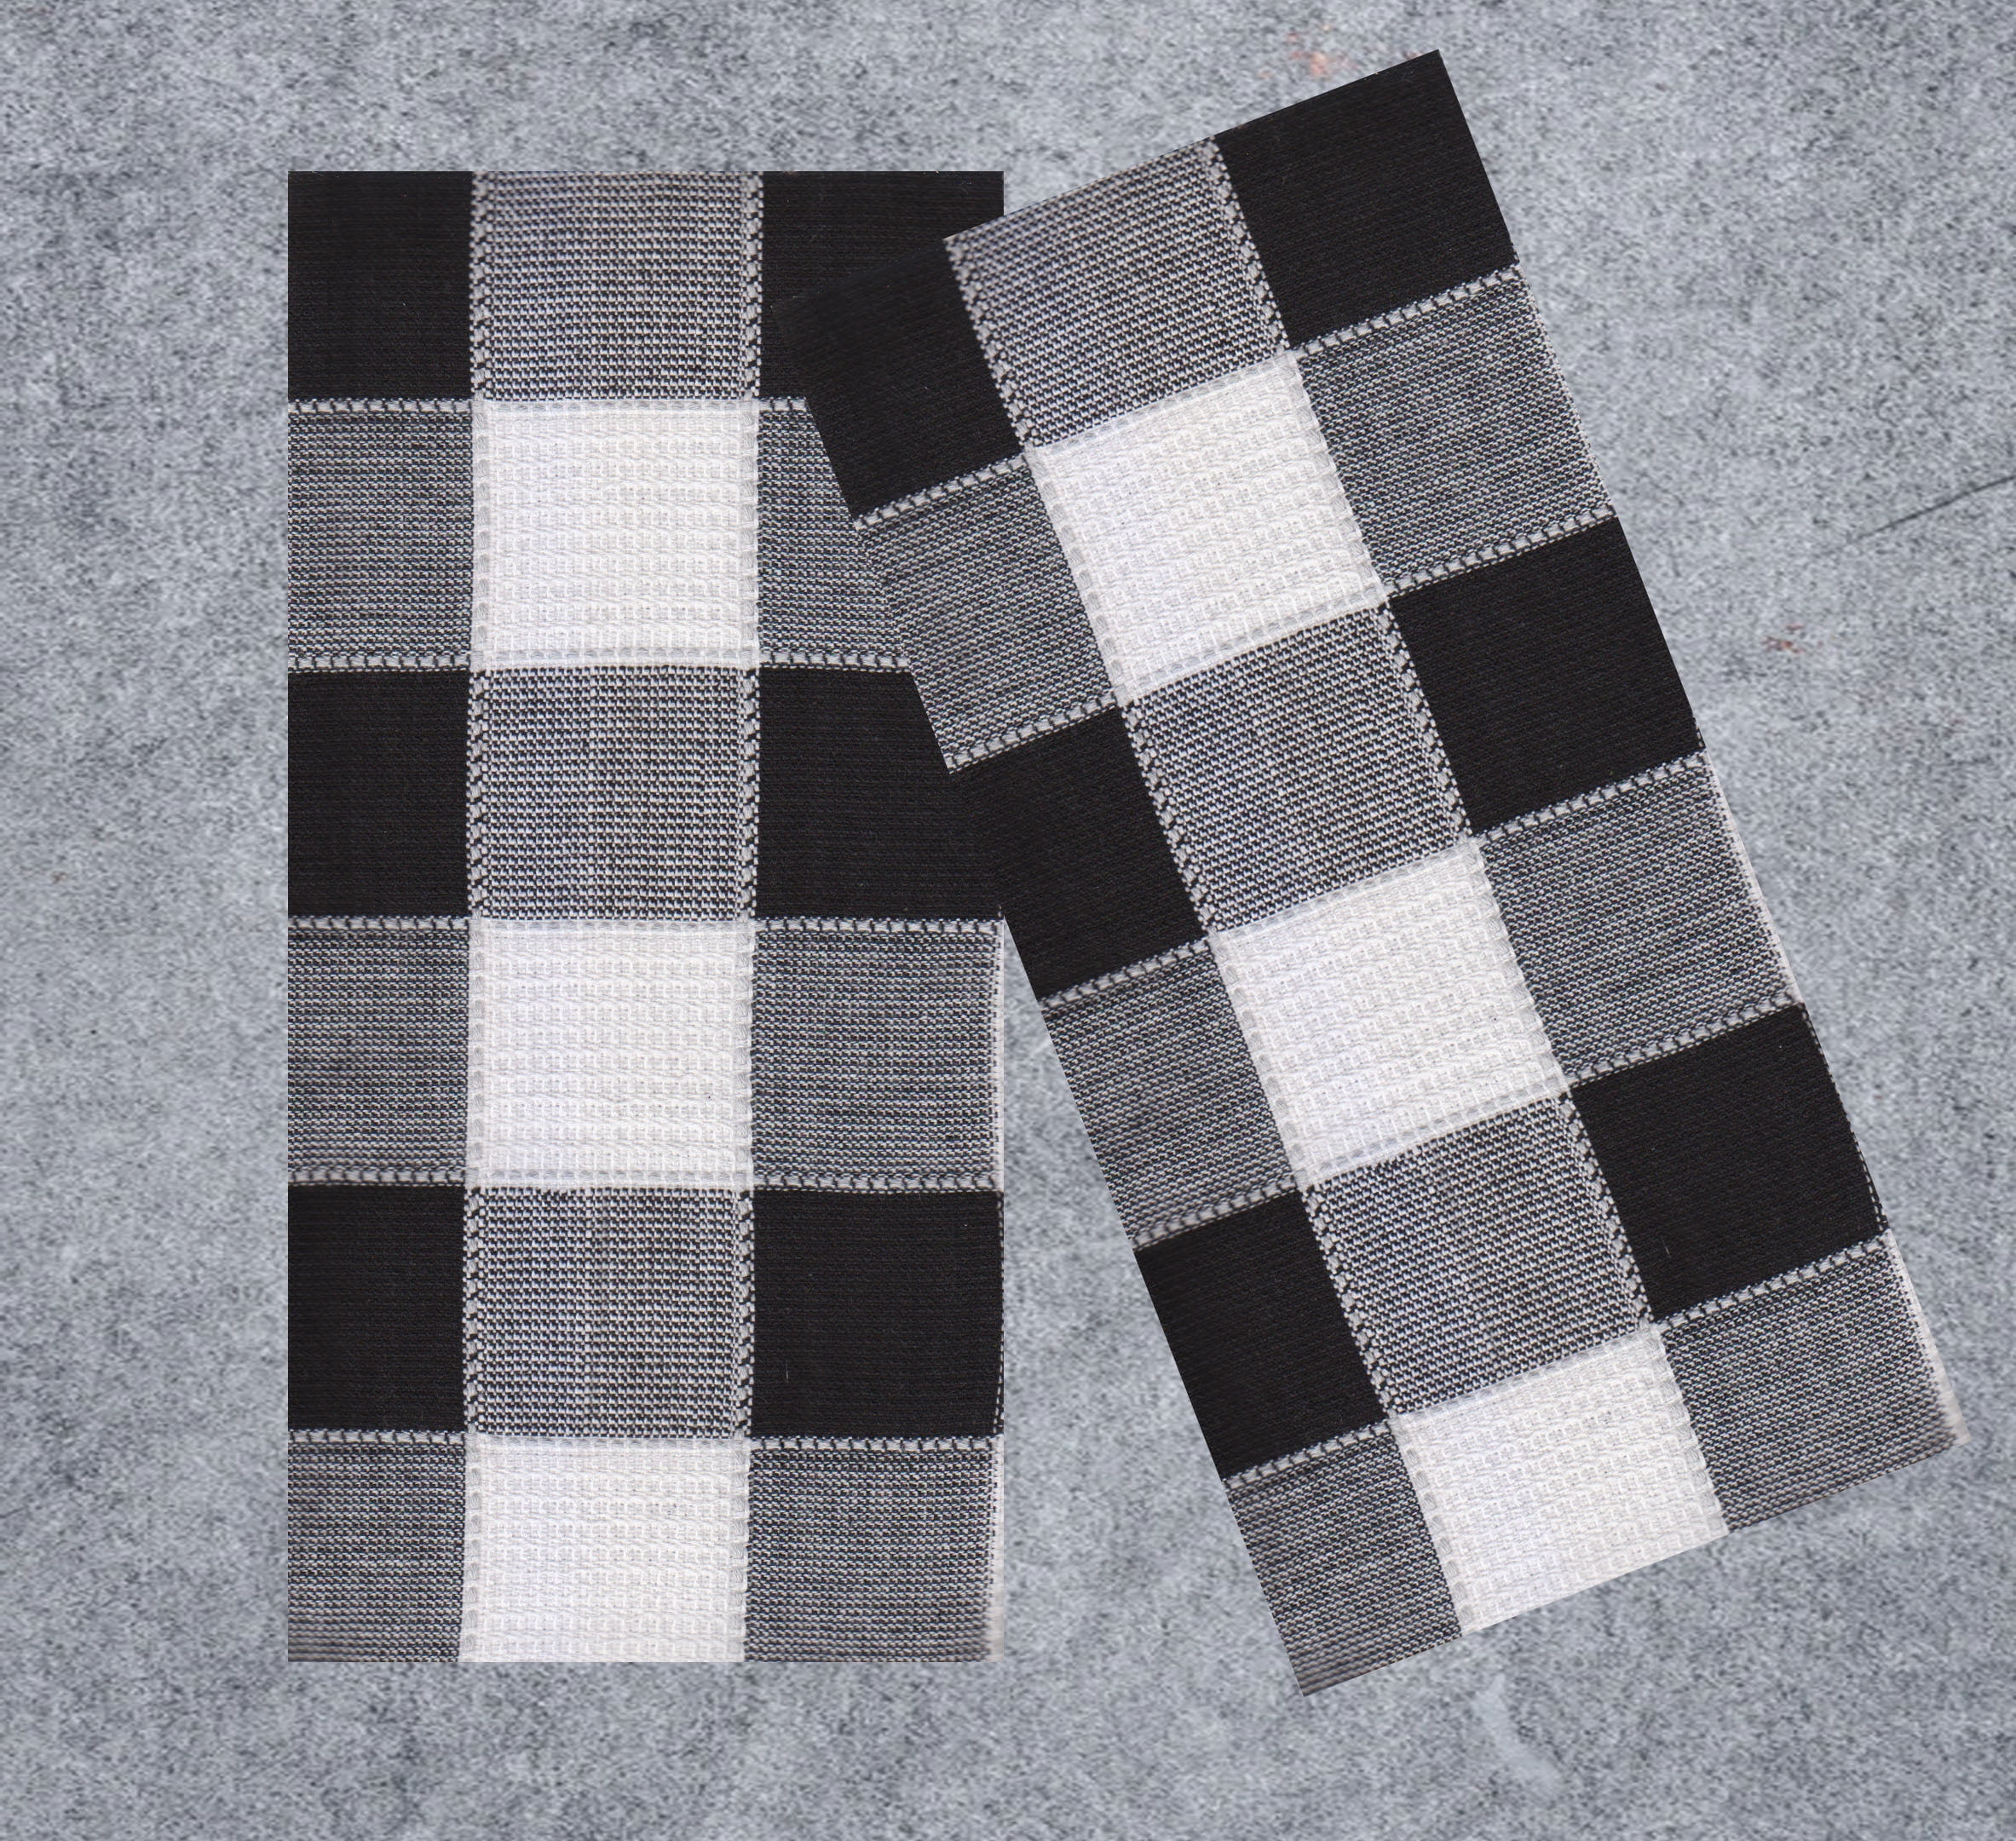 ALAZA White and Black Buffalo Plaid Hand Bath Towel Set of 2,Cotton  Bathroom Towels Soft Absorbent Guest Towels Hanging Kitchen Dish Towel Decor